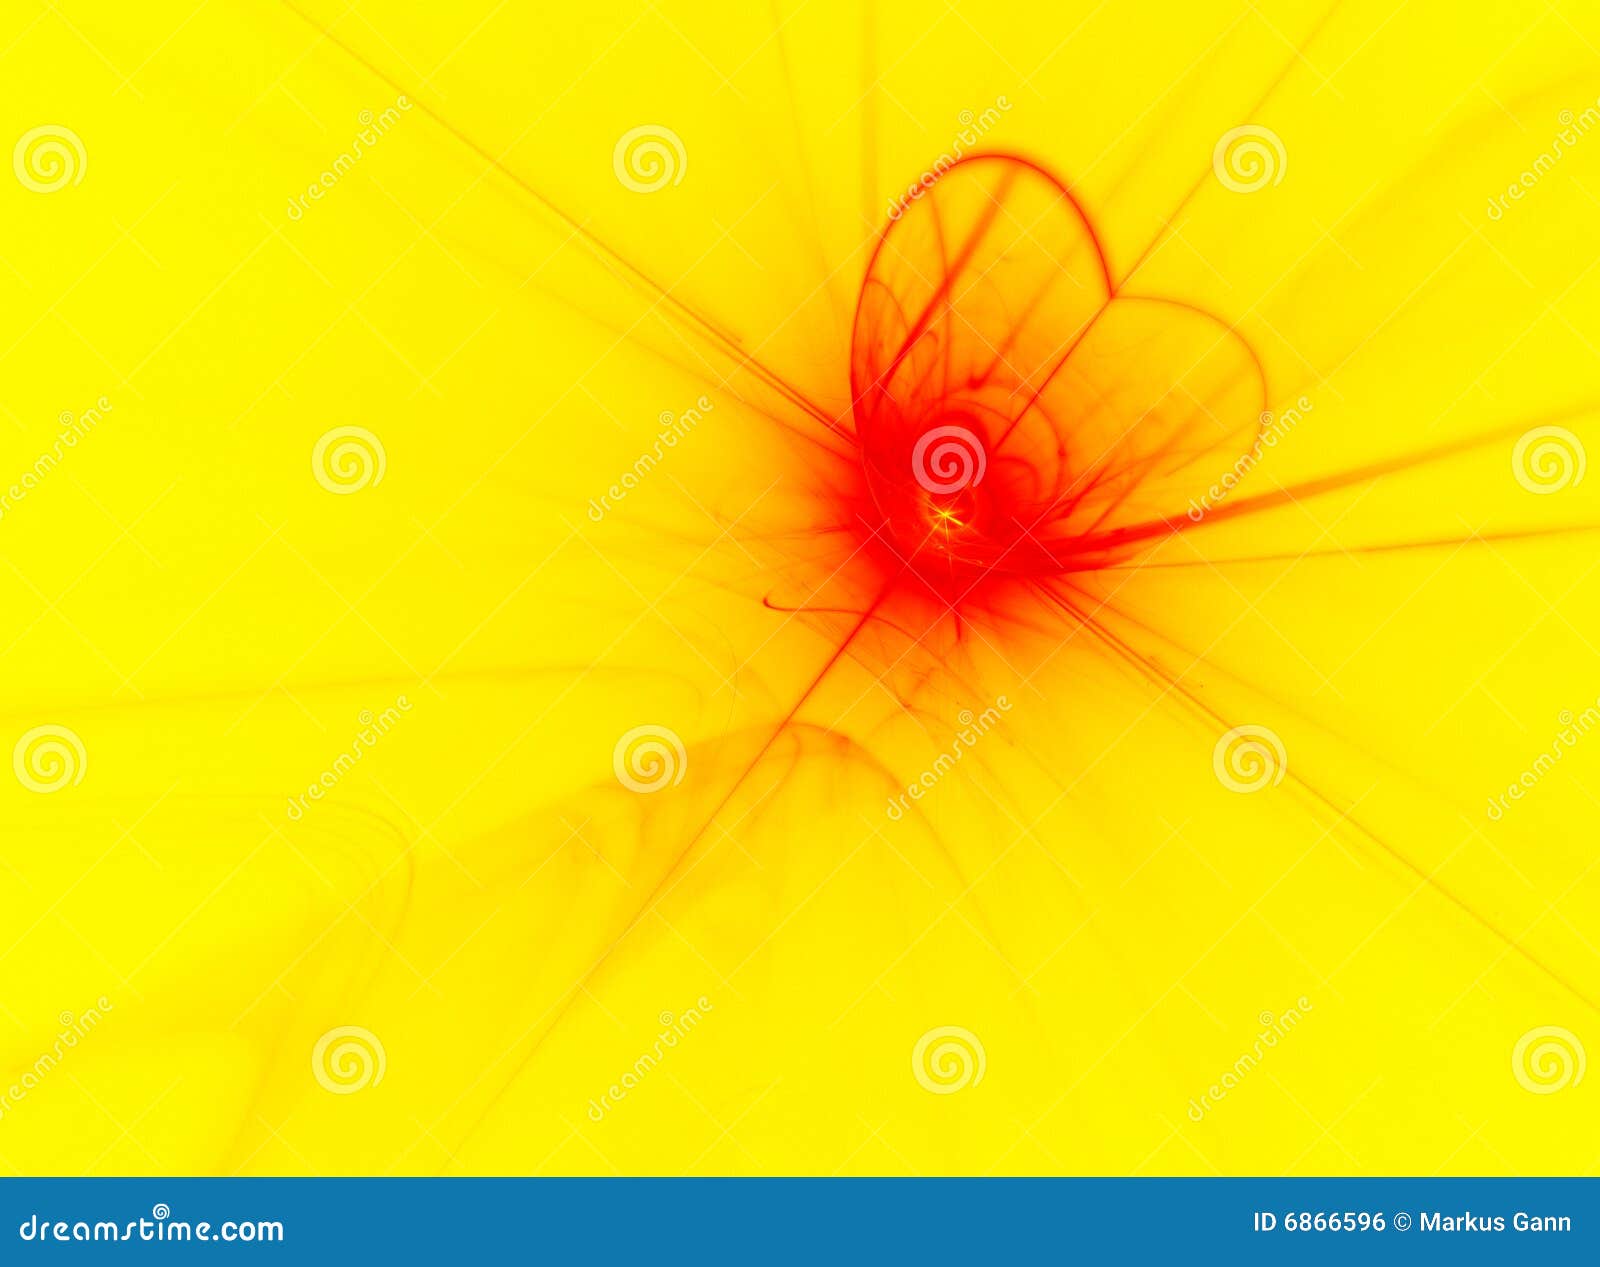 Abstract yellow background stock photo. Image of motion - 6866596